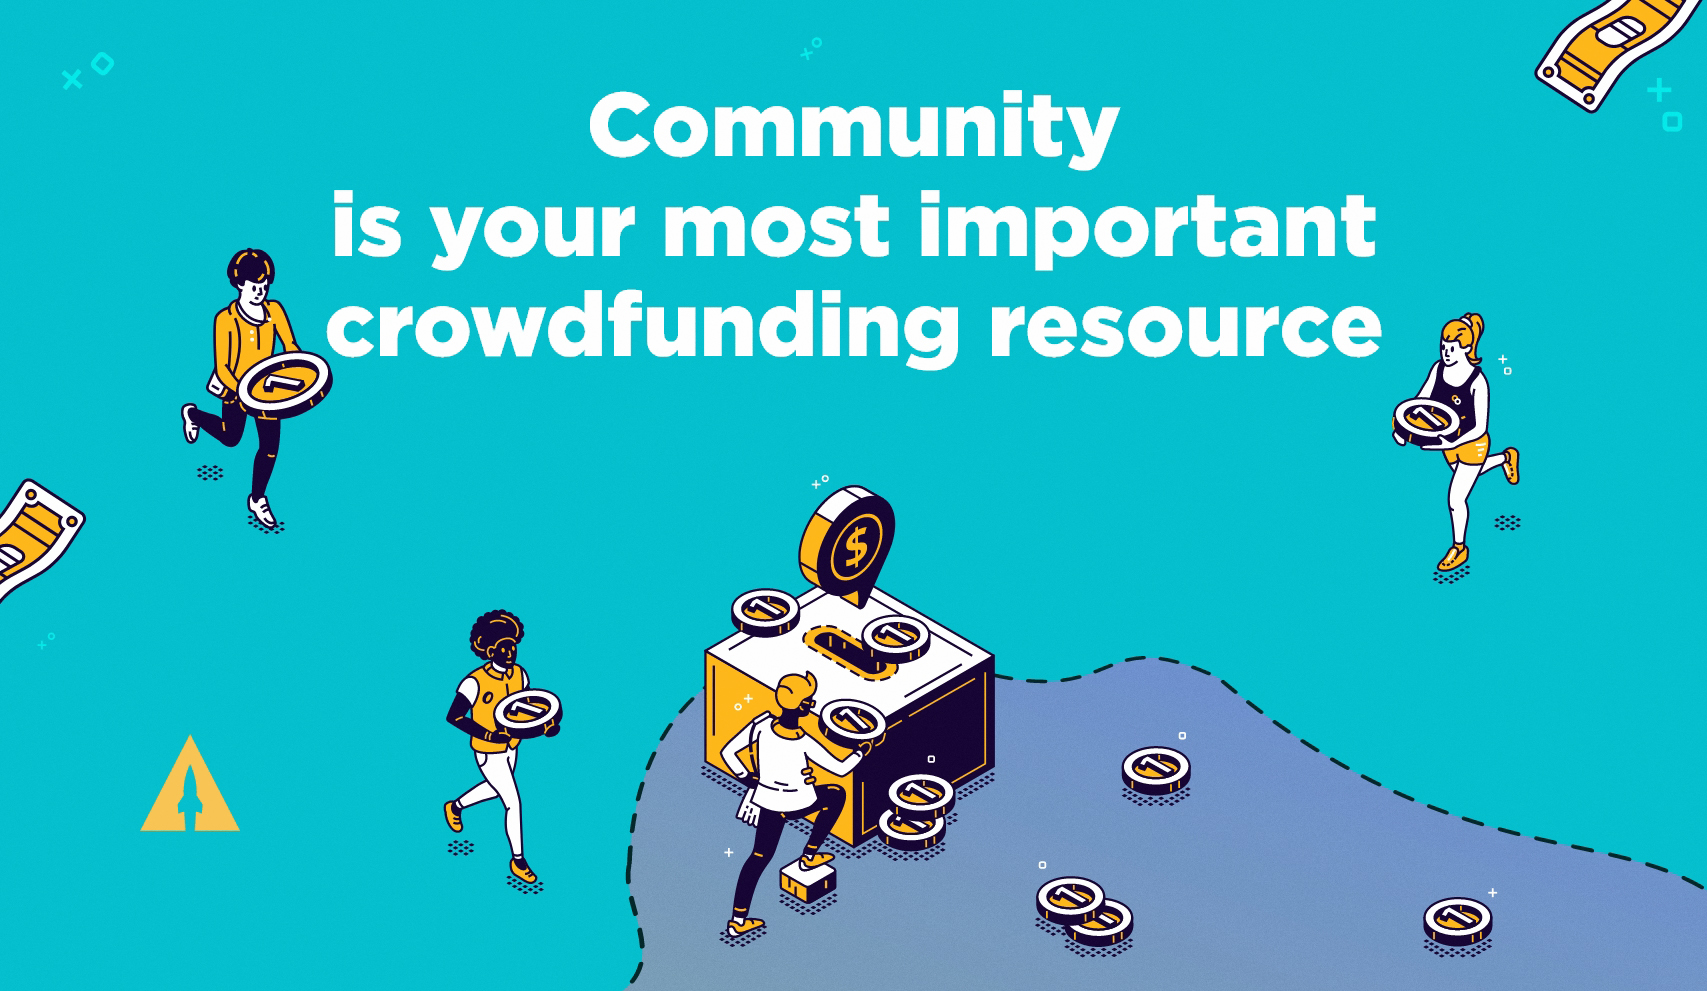 Community is your most important crowdfunding resource